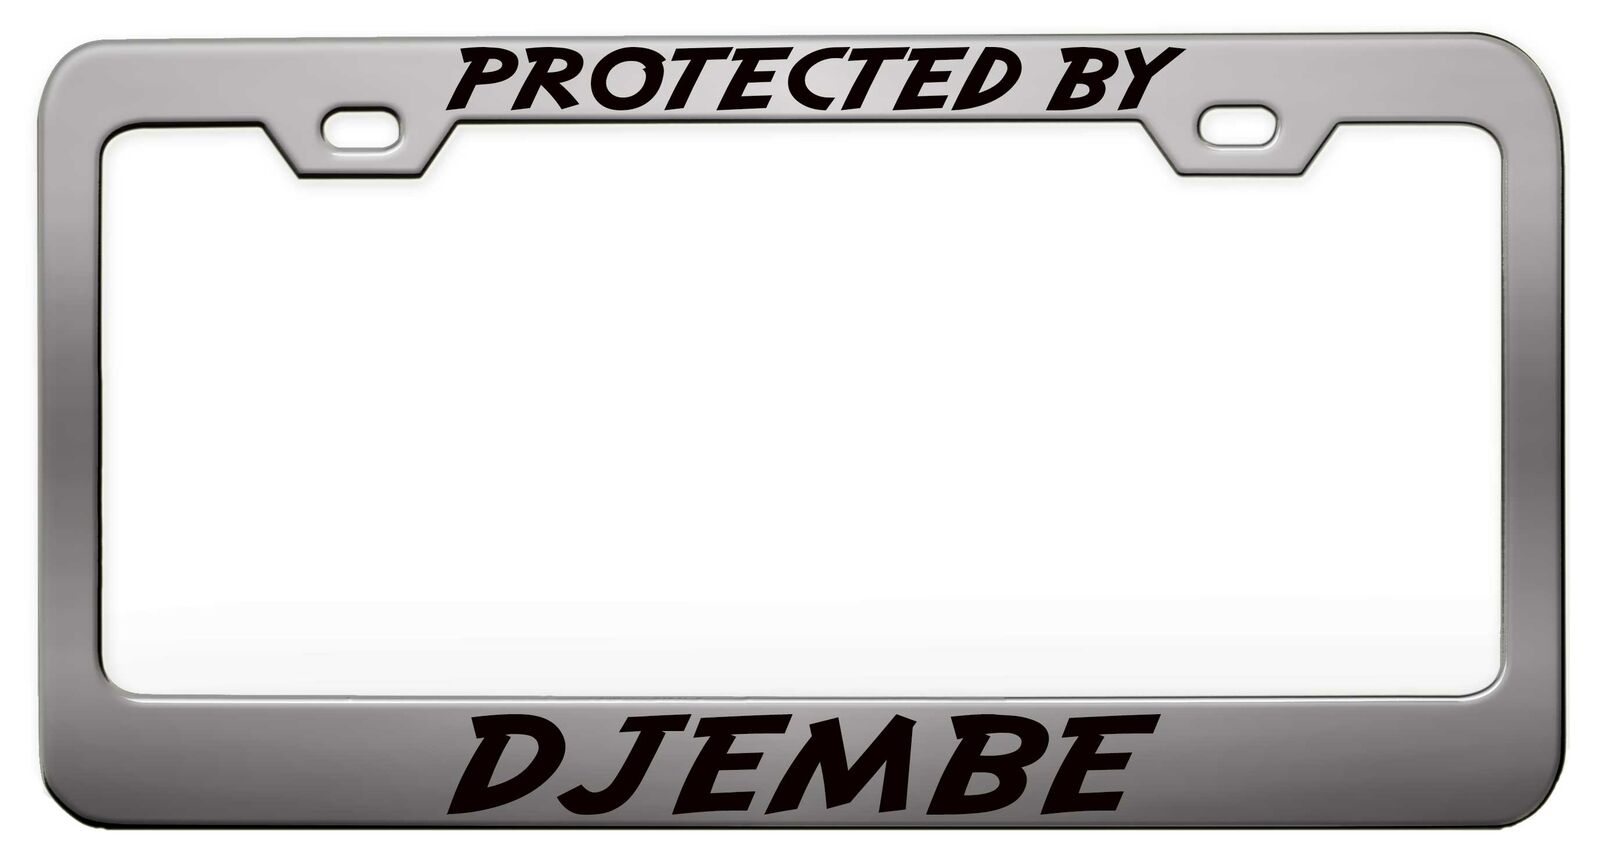 PROTECTED BY DJEMBE Steel License Plate Frame Car SUV T53